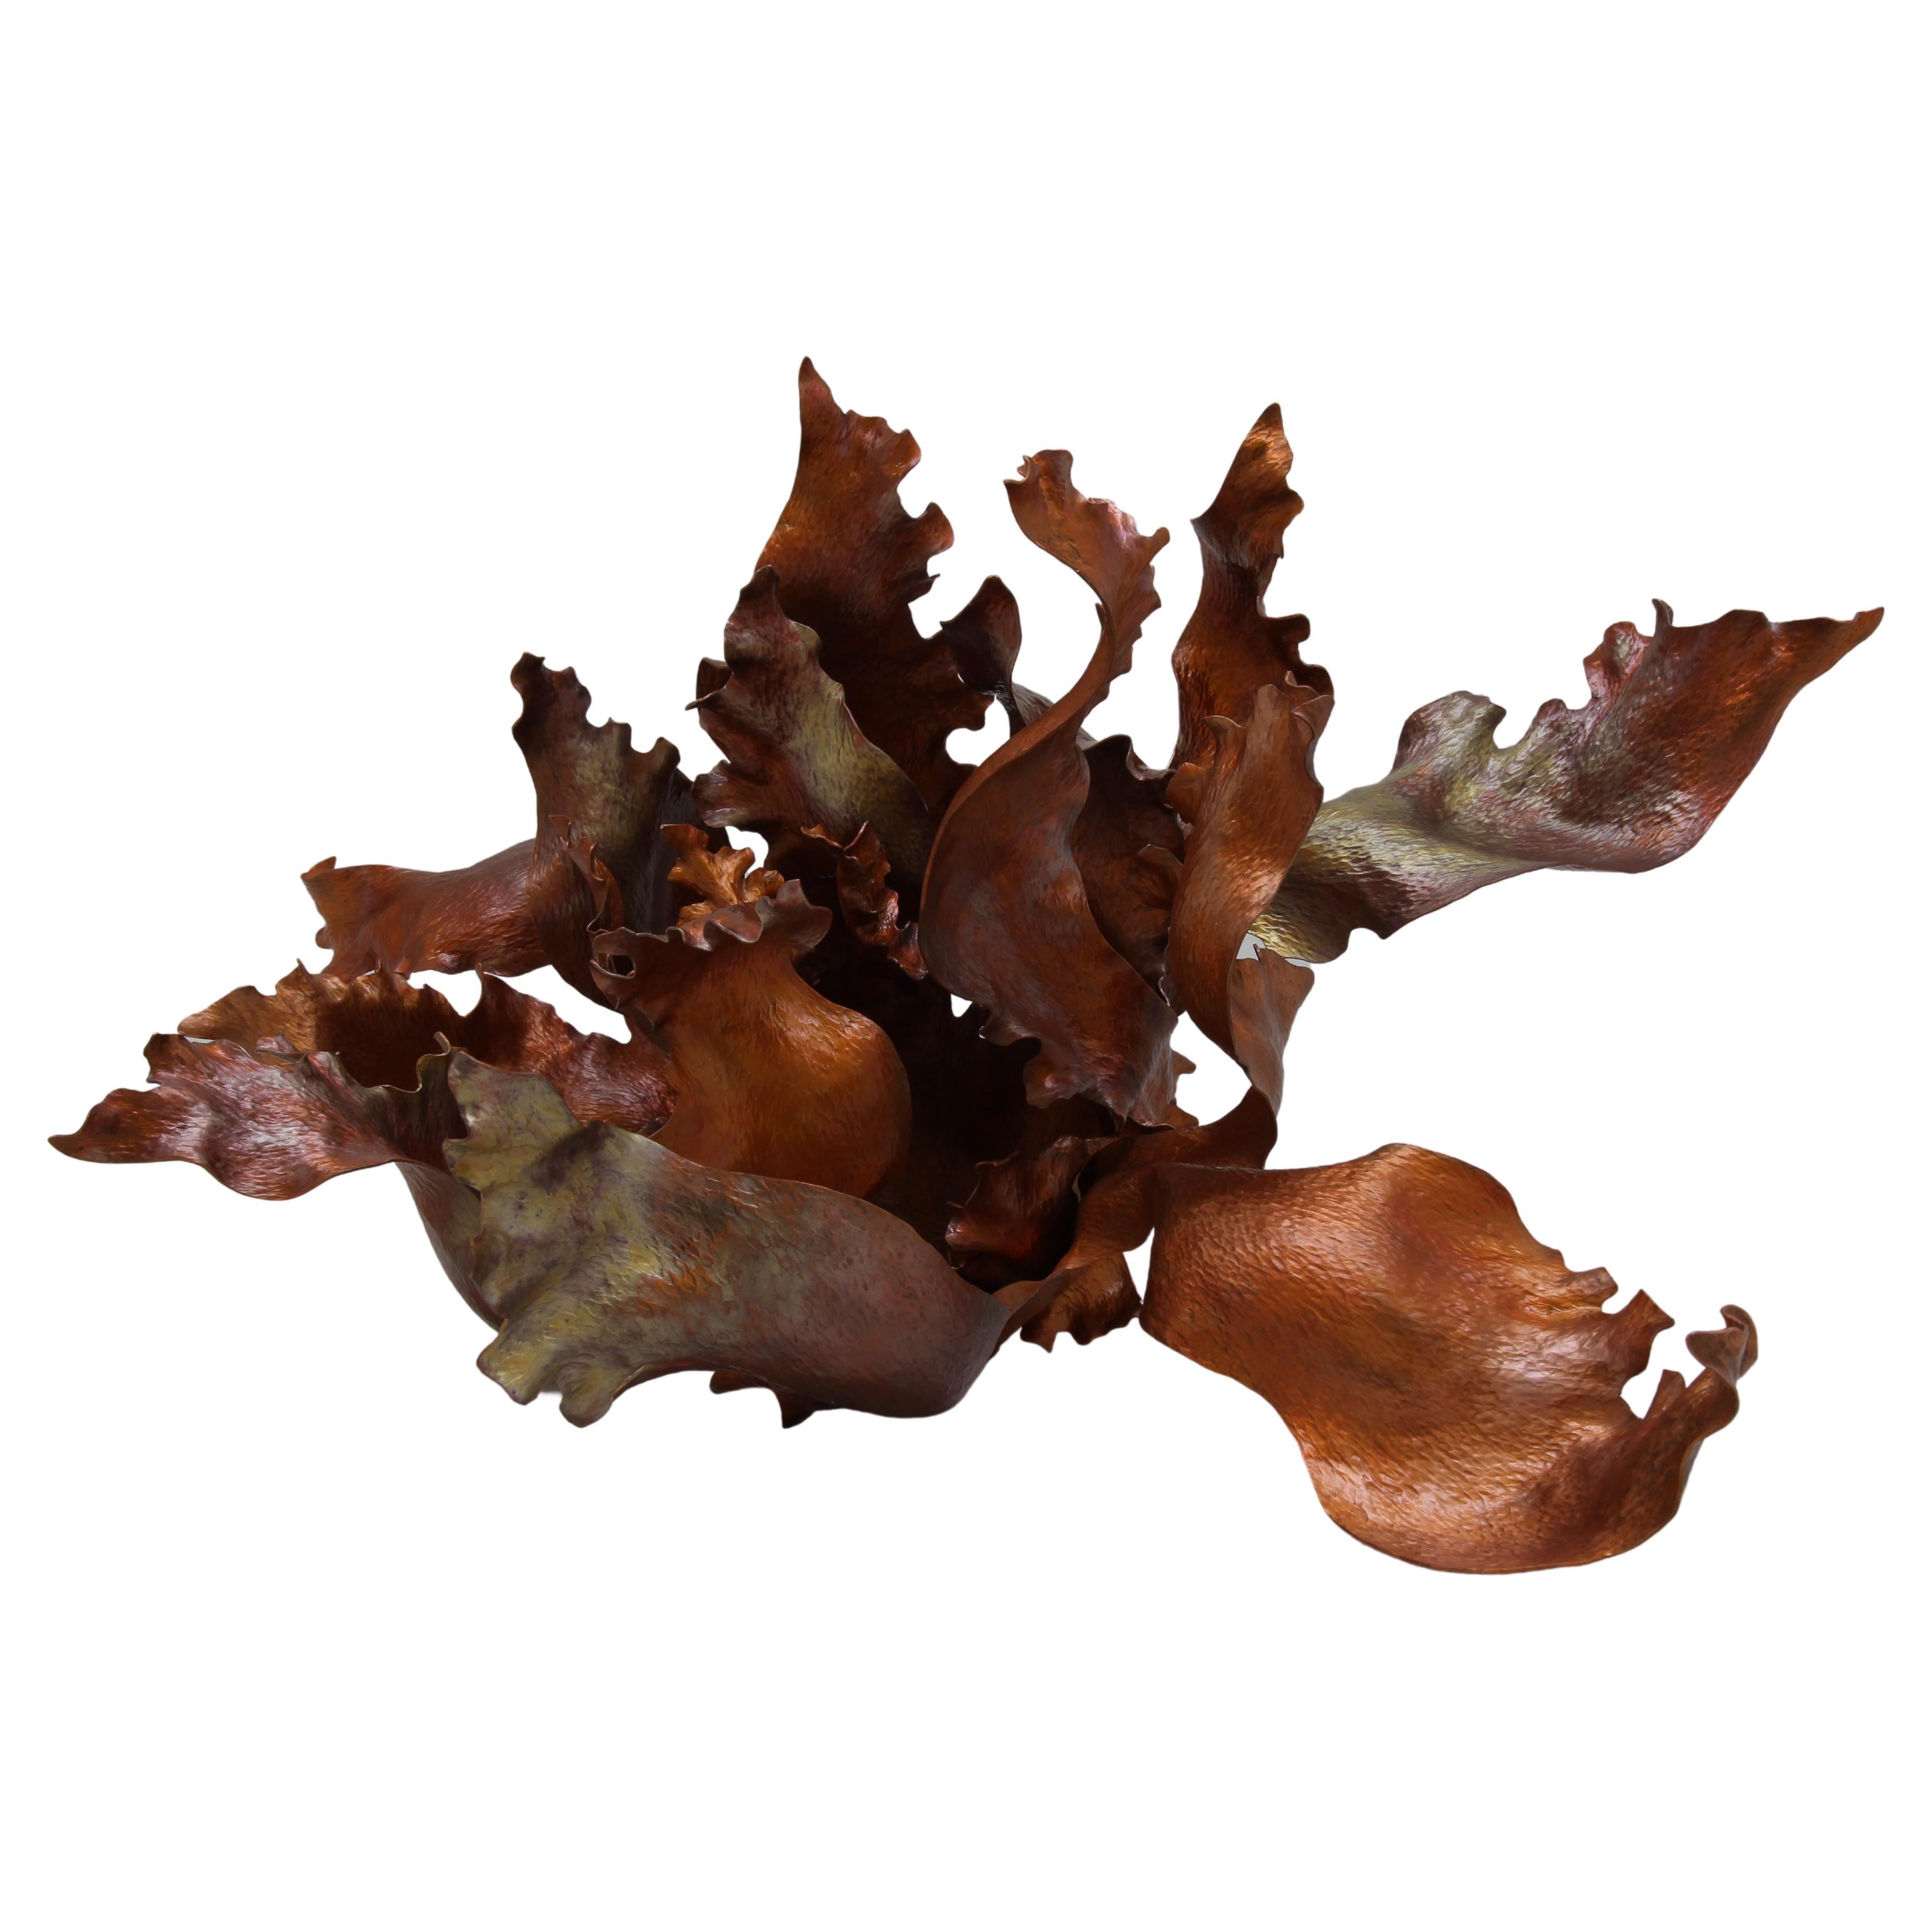  "In bloom" Handmade Centerpiece in Copper by Cristina Romo For Sale